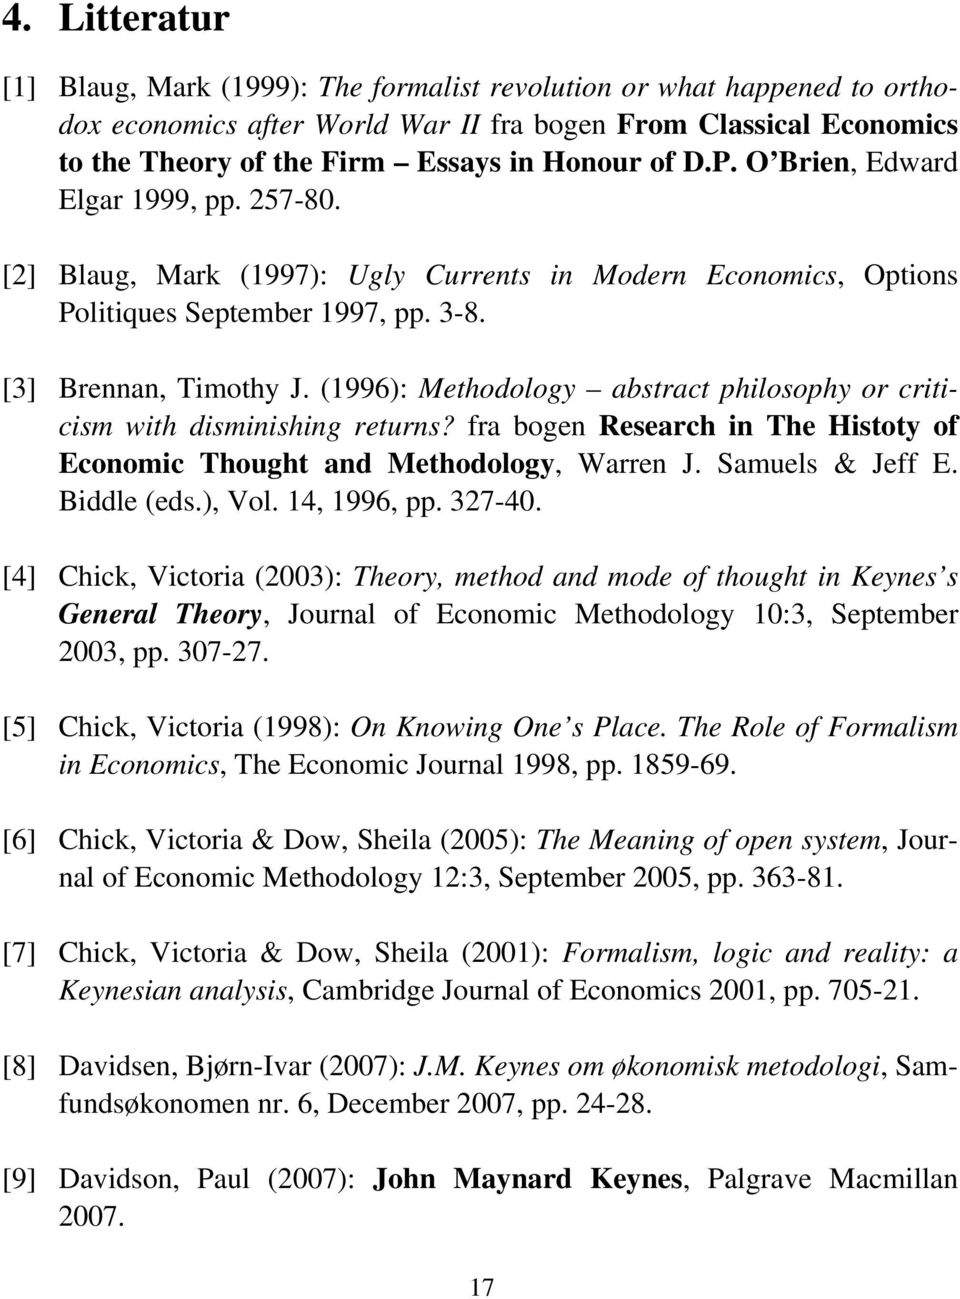 (1996): Methodology abstract philosophy or criticism with disminishing returns? fra bogen Research in The Histoty of Economic Thought and Methodology, Warren J. Samuels & Jeff E. Biddle (eds.), Vol.